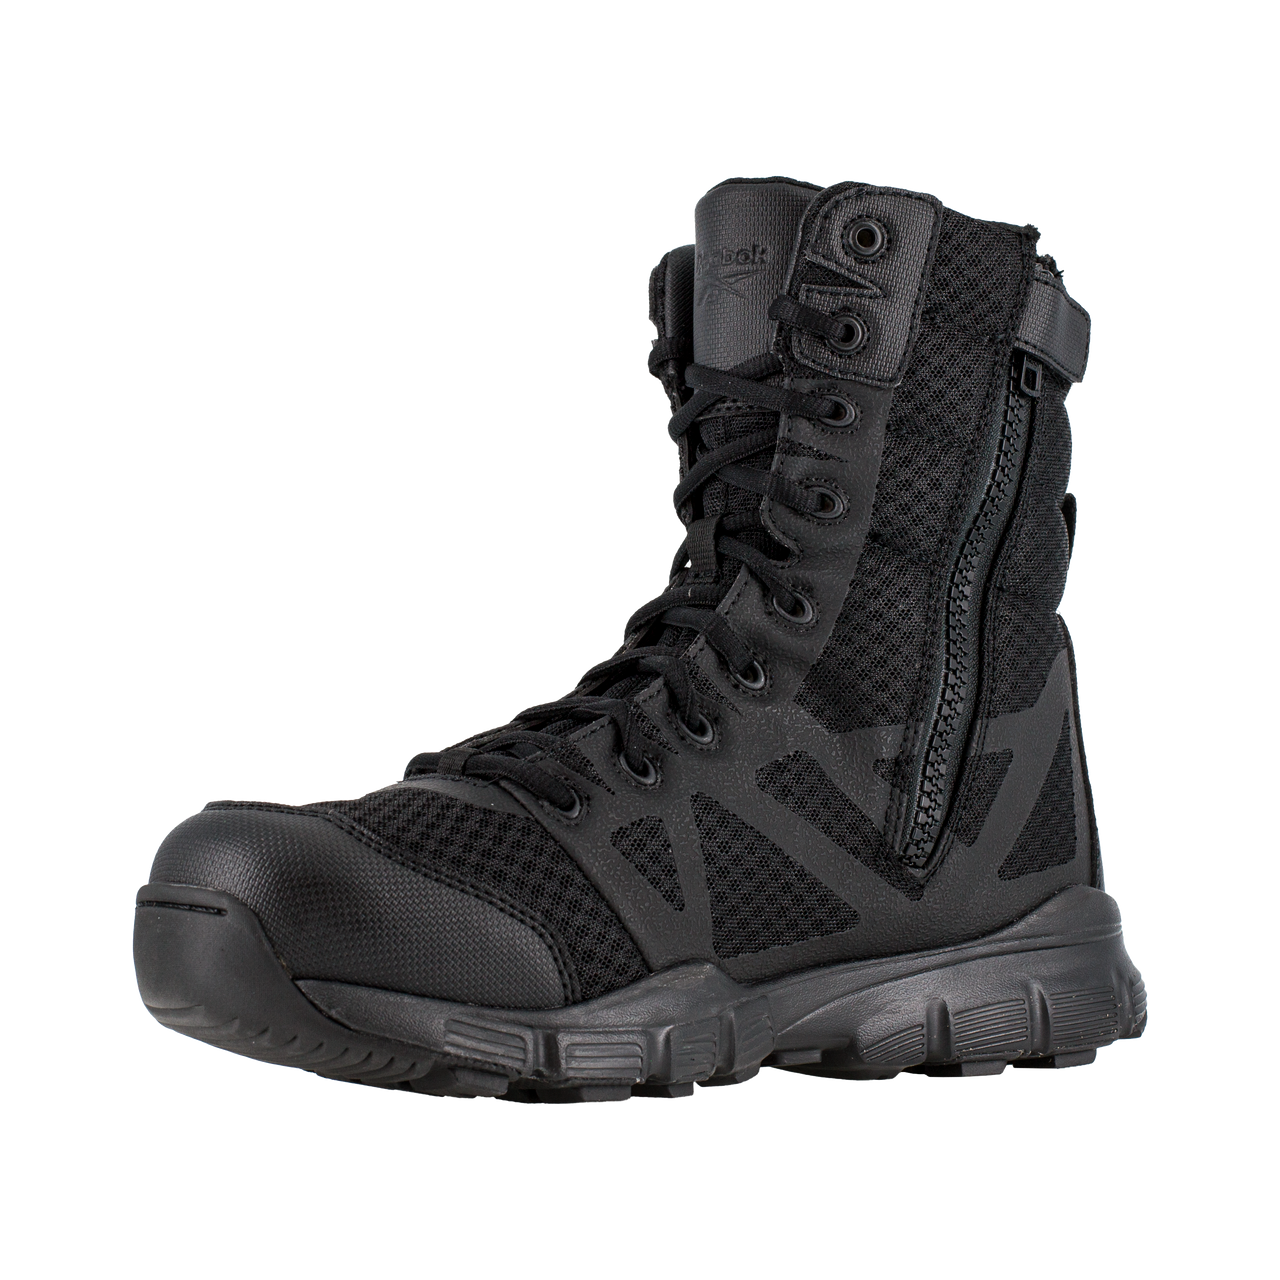 Reebok Dauntless 8'' Seamless Tactical Boot with Soft Toe - Black RB8720 - Clothing & Accessories